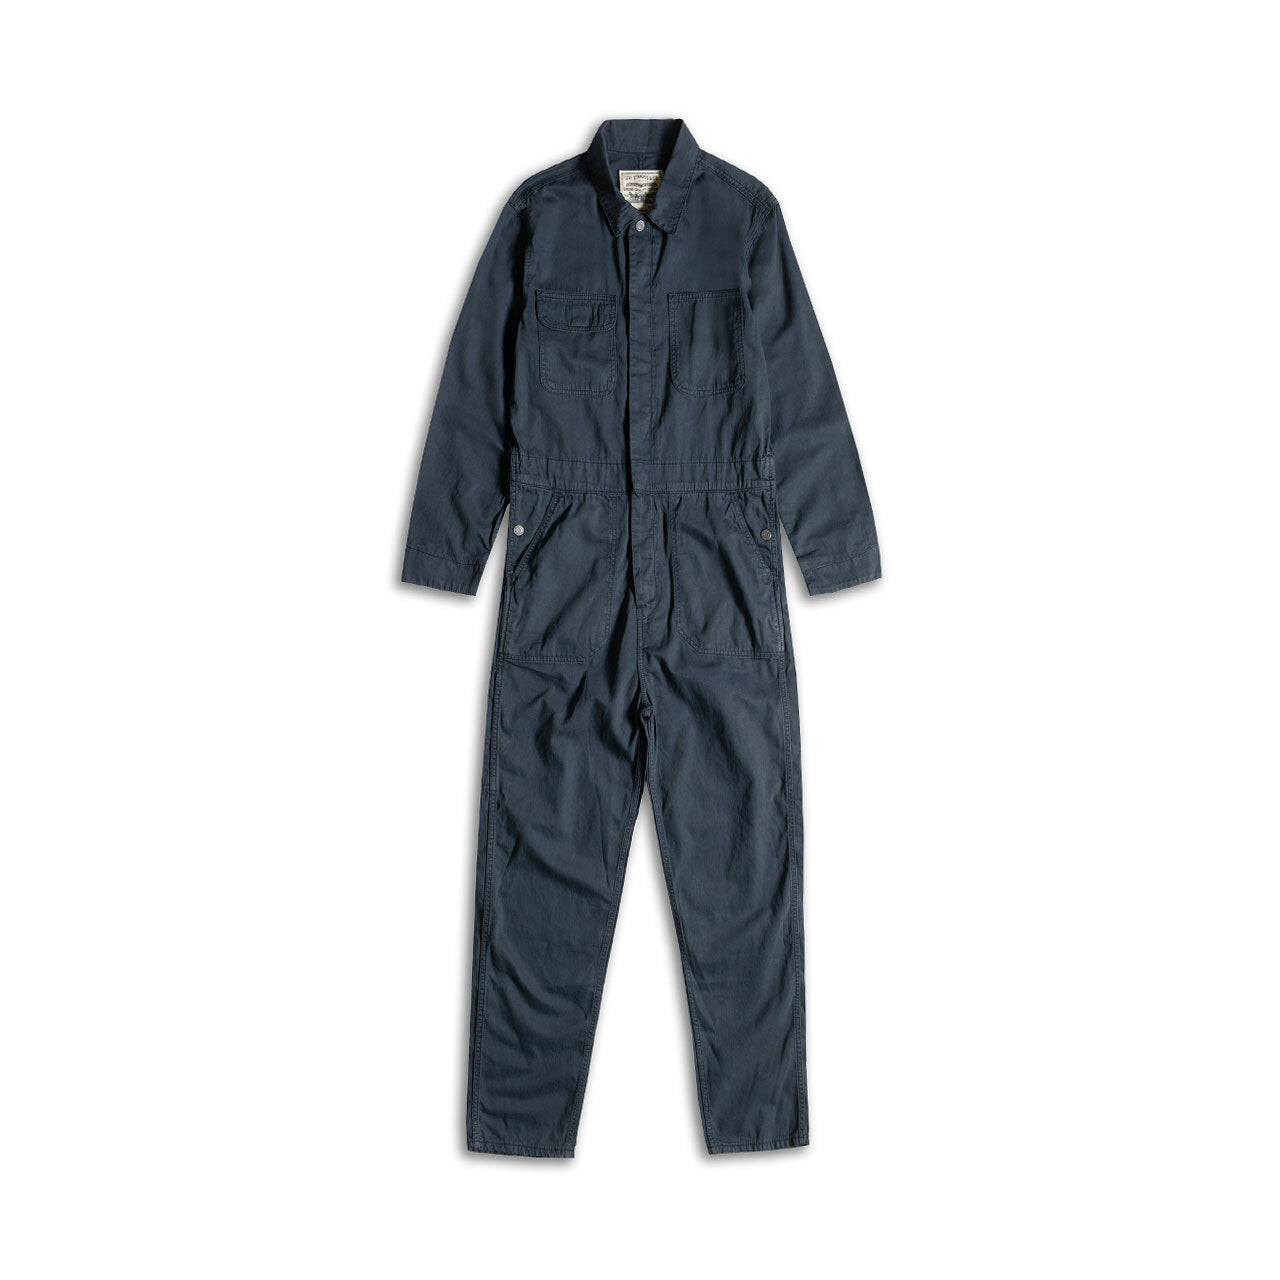 Levi's WellThread Stay Loose Coveralls | Uncrate